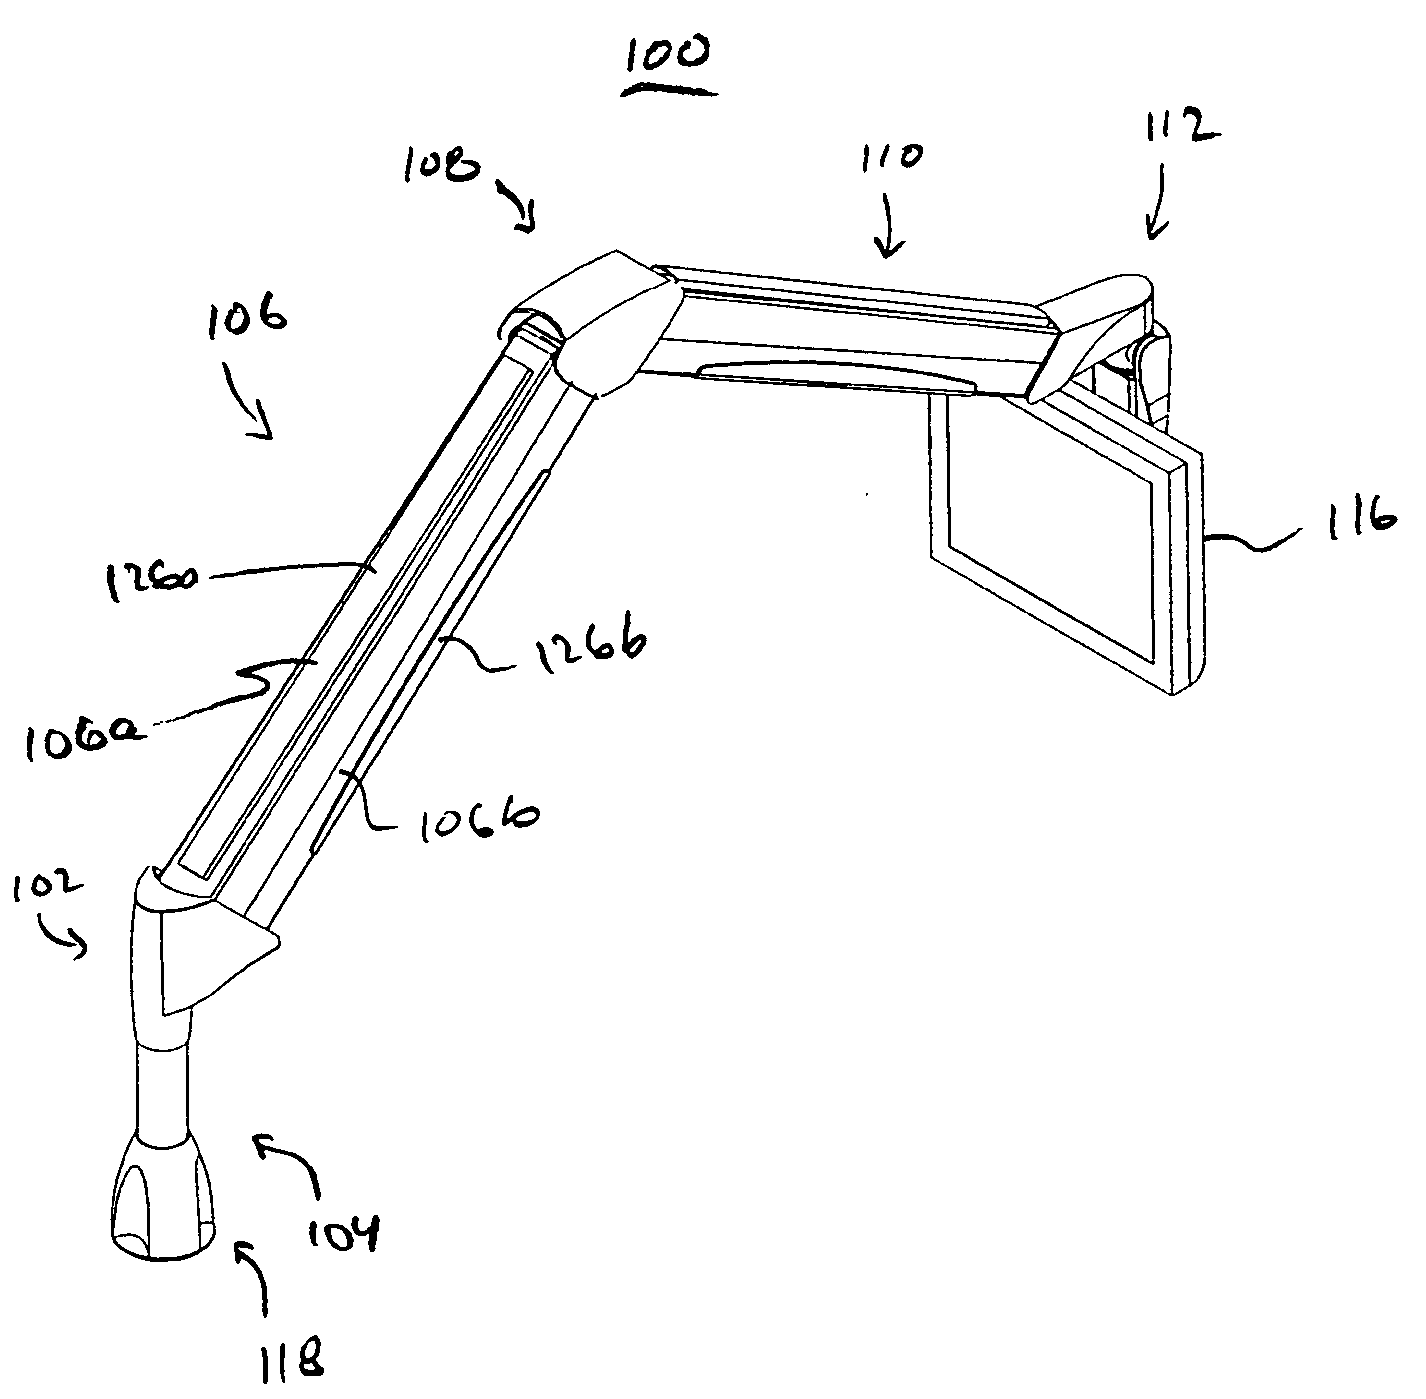 Extension arm with moving clevis and cable management